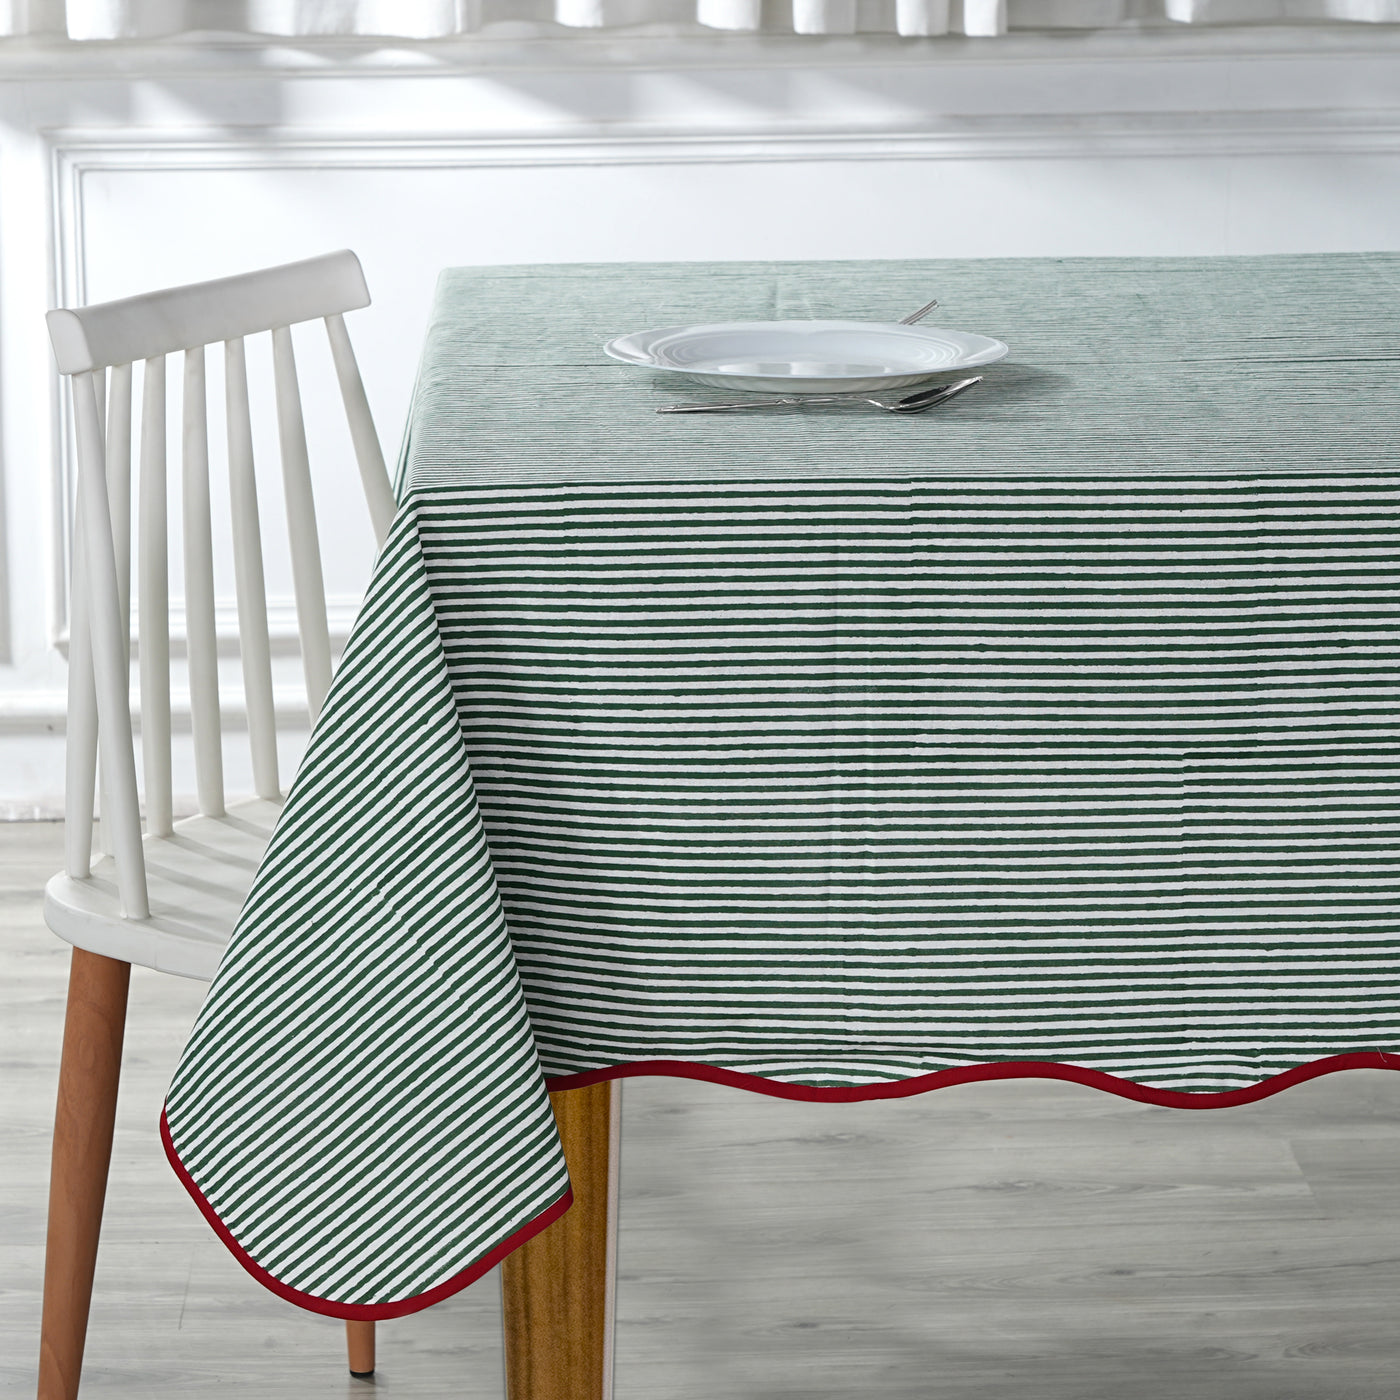 Fabricrush Green Stripes with Red Piping Indian Hand Block Printed Pure Cotton Tablecloth for Farmhouse Housewarming Wedding Restaurant Home Garden Bar